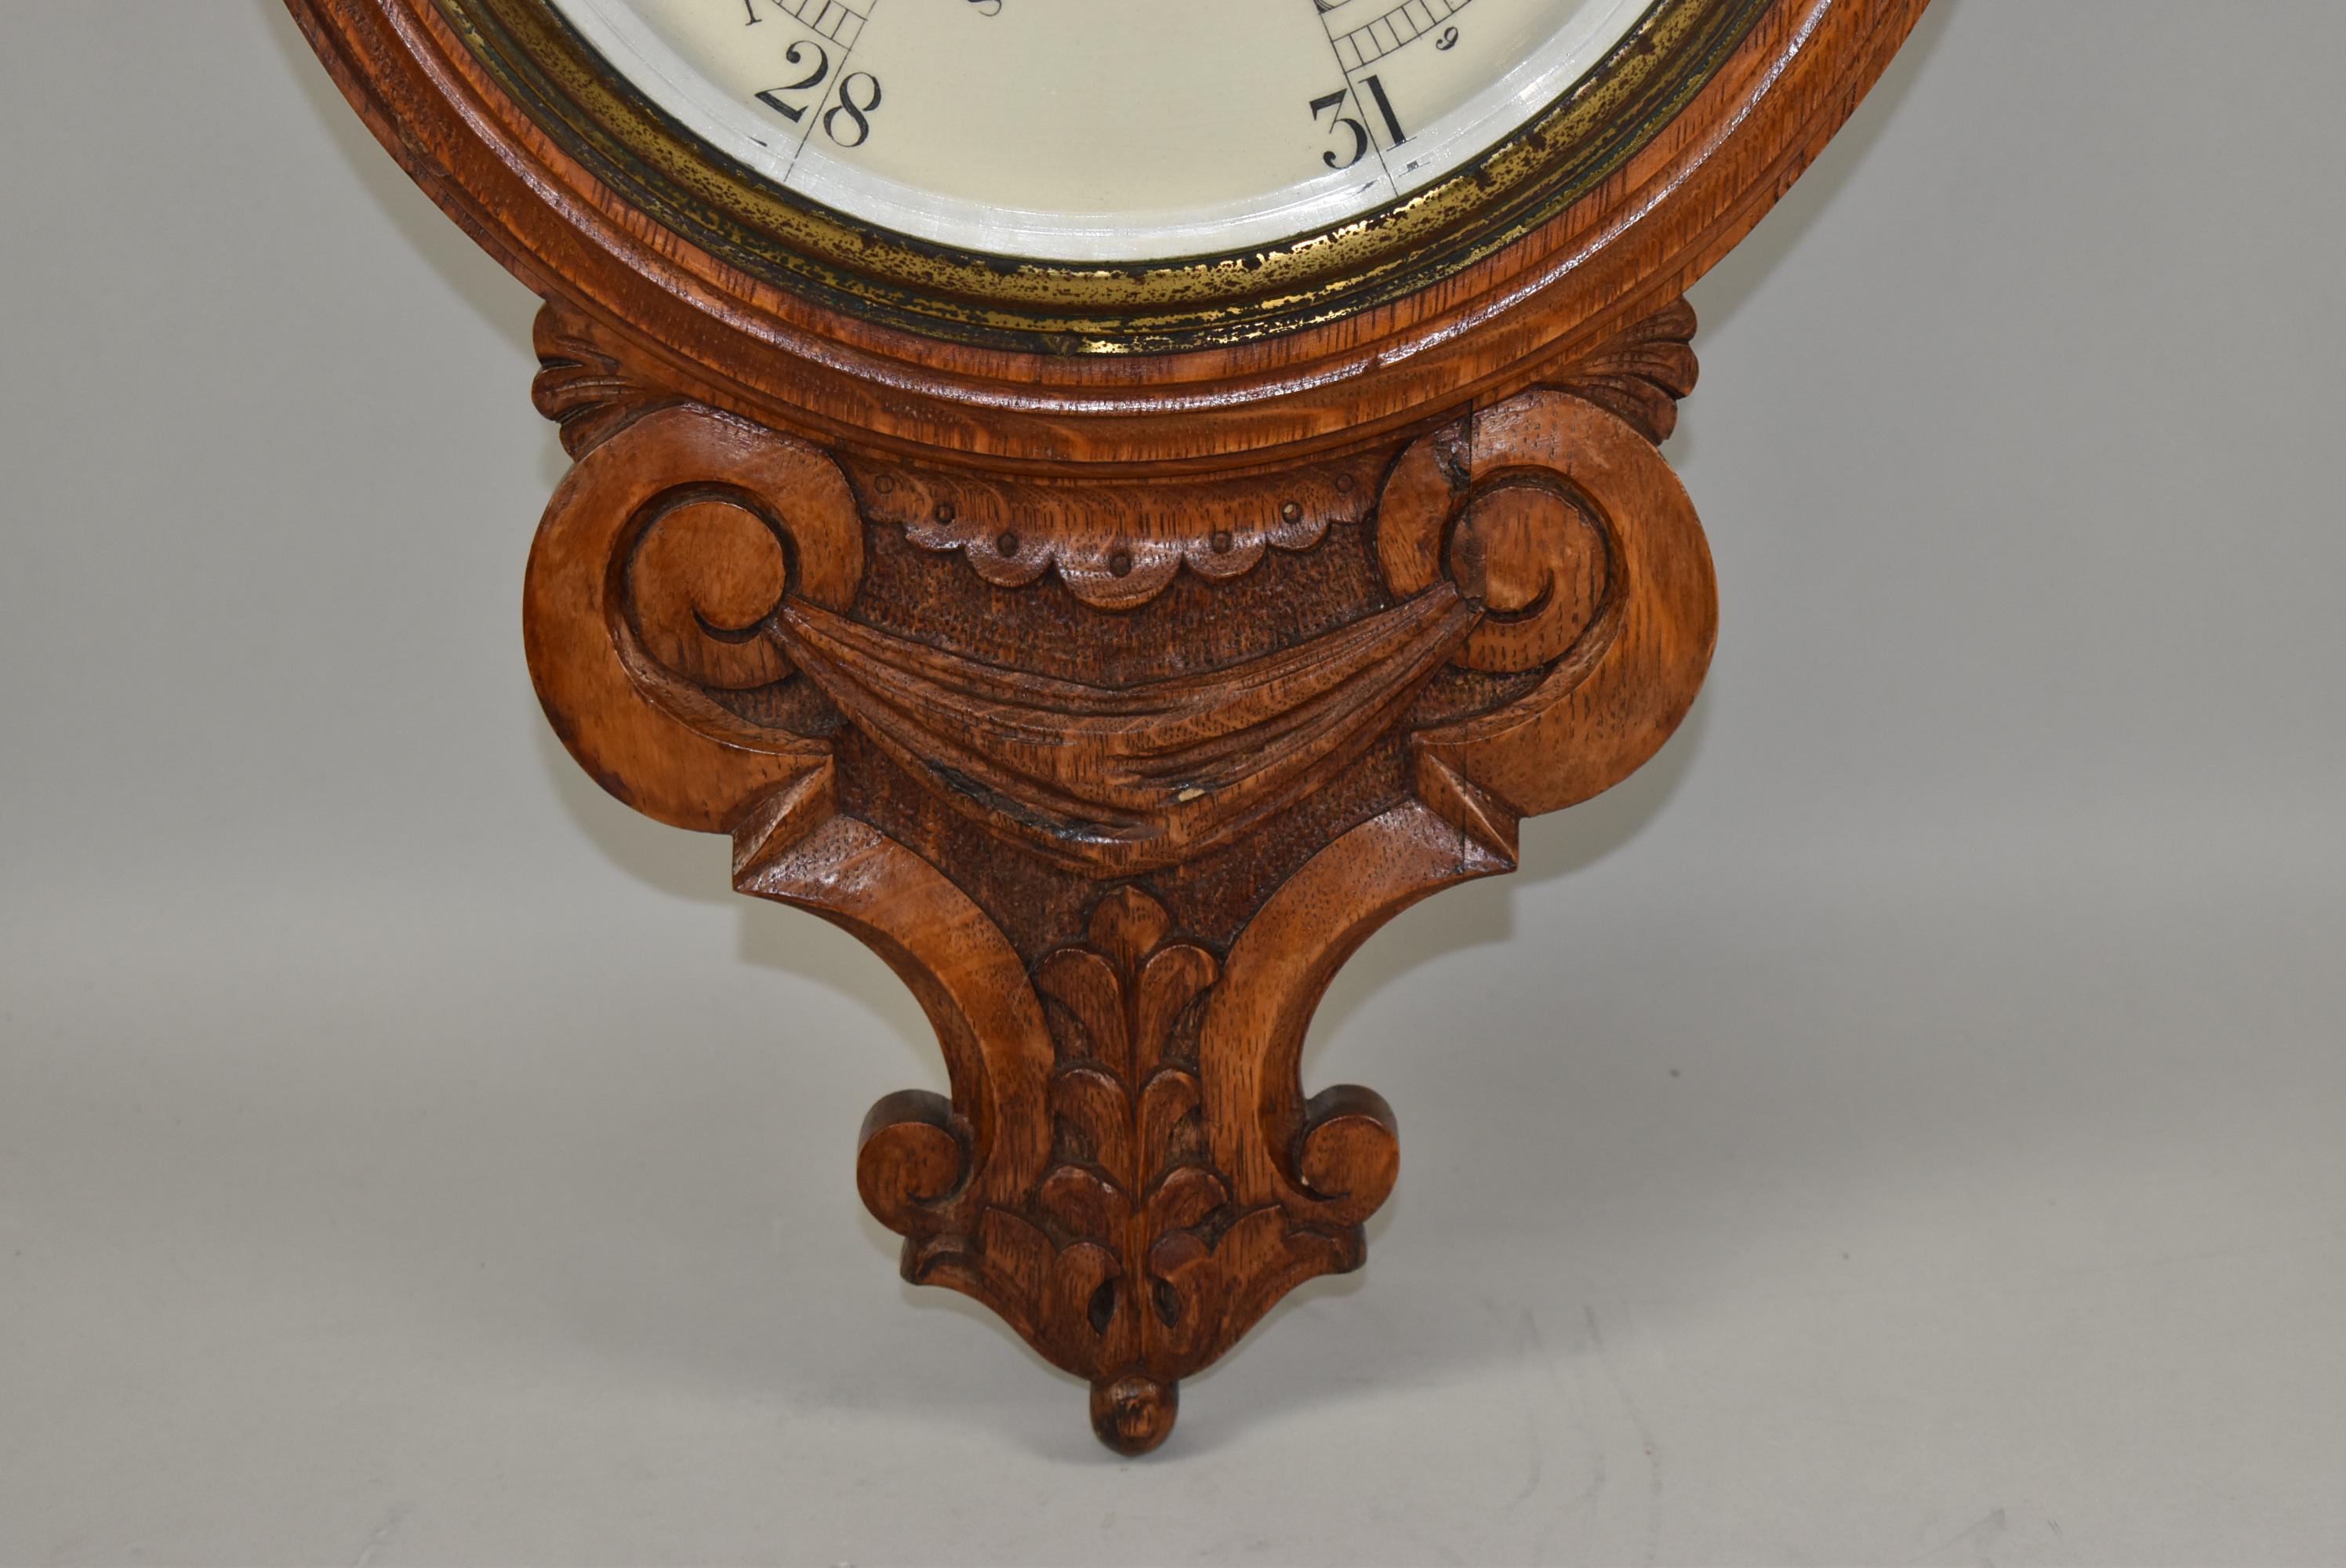 Antique oak carved barometer by Lloyd, Payne & Amiel Manchester England. Thermometer mounted above opening. Porcelain dial. Operating condition. Beveled glass in a brass bezel. Very nice to excellent condition. Dimensions: 3